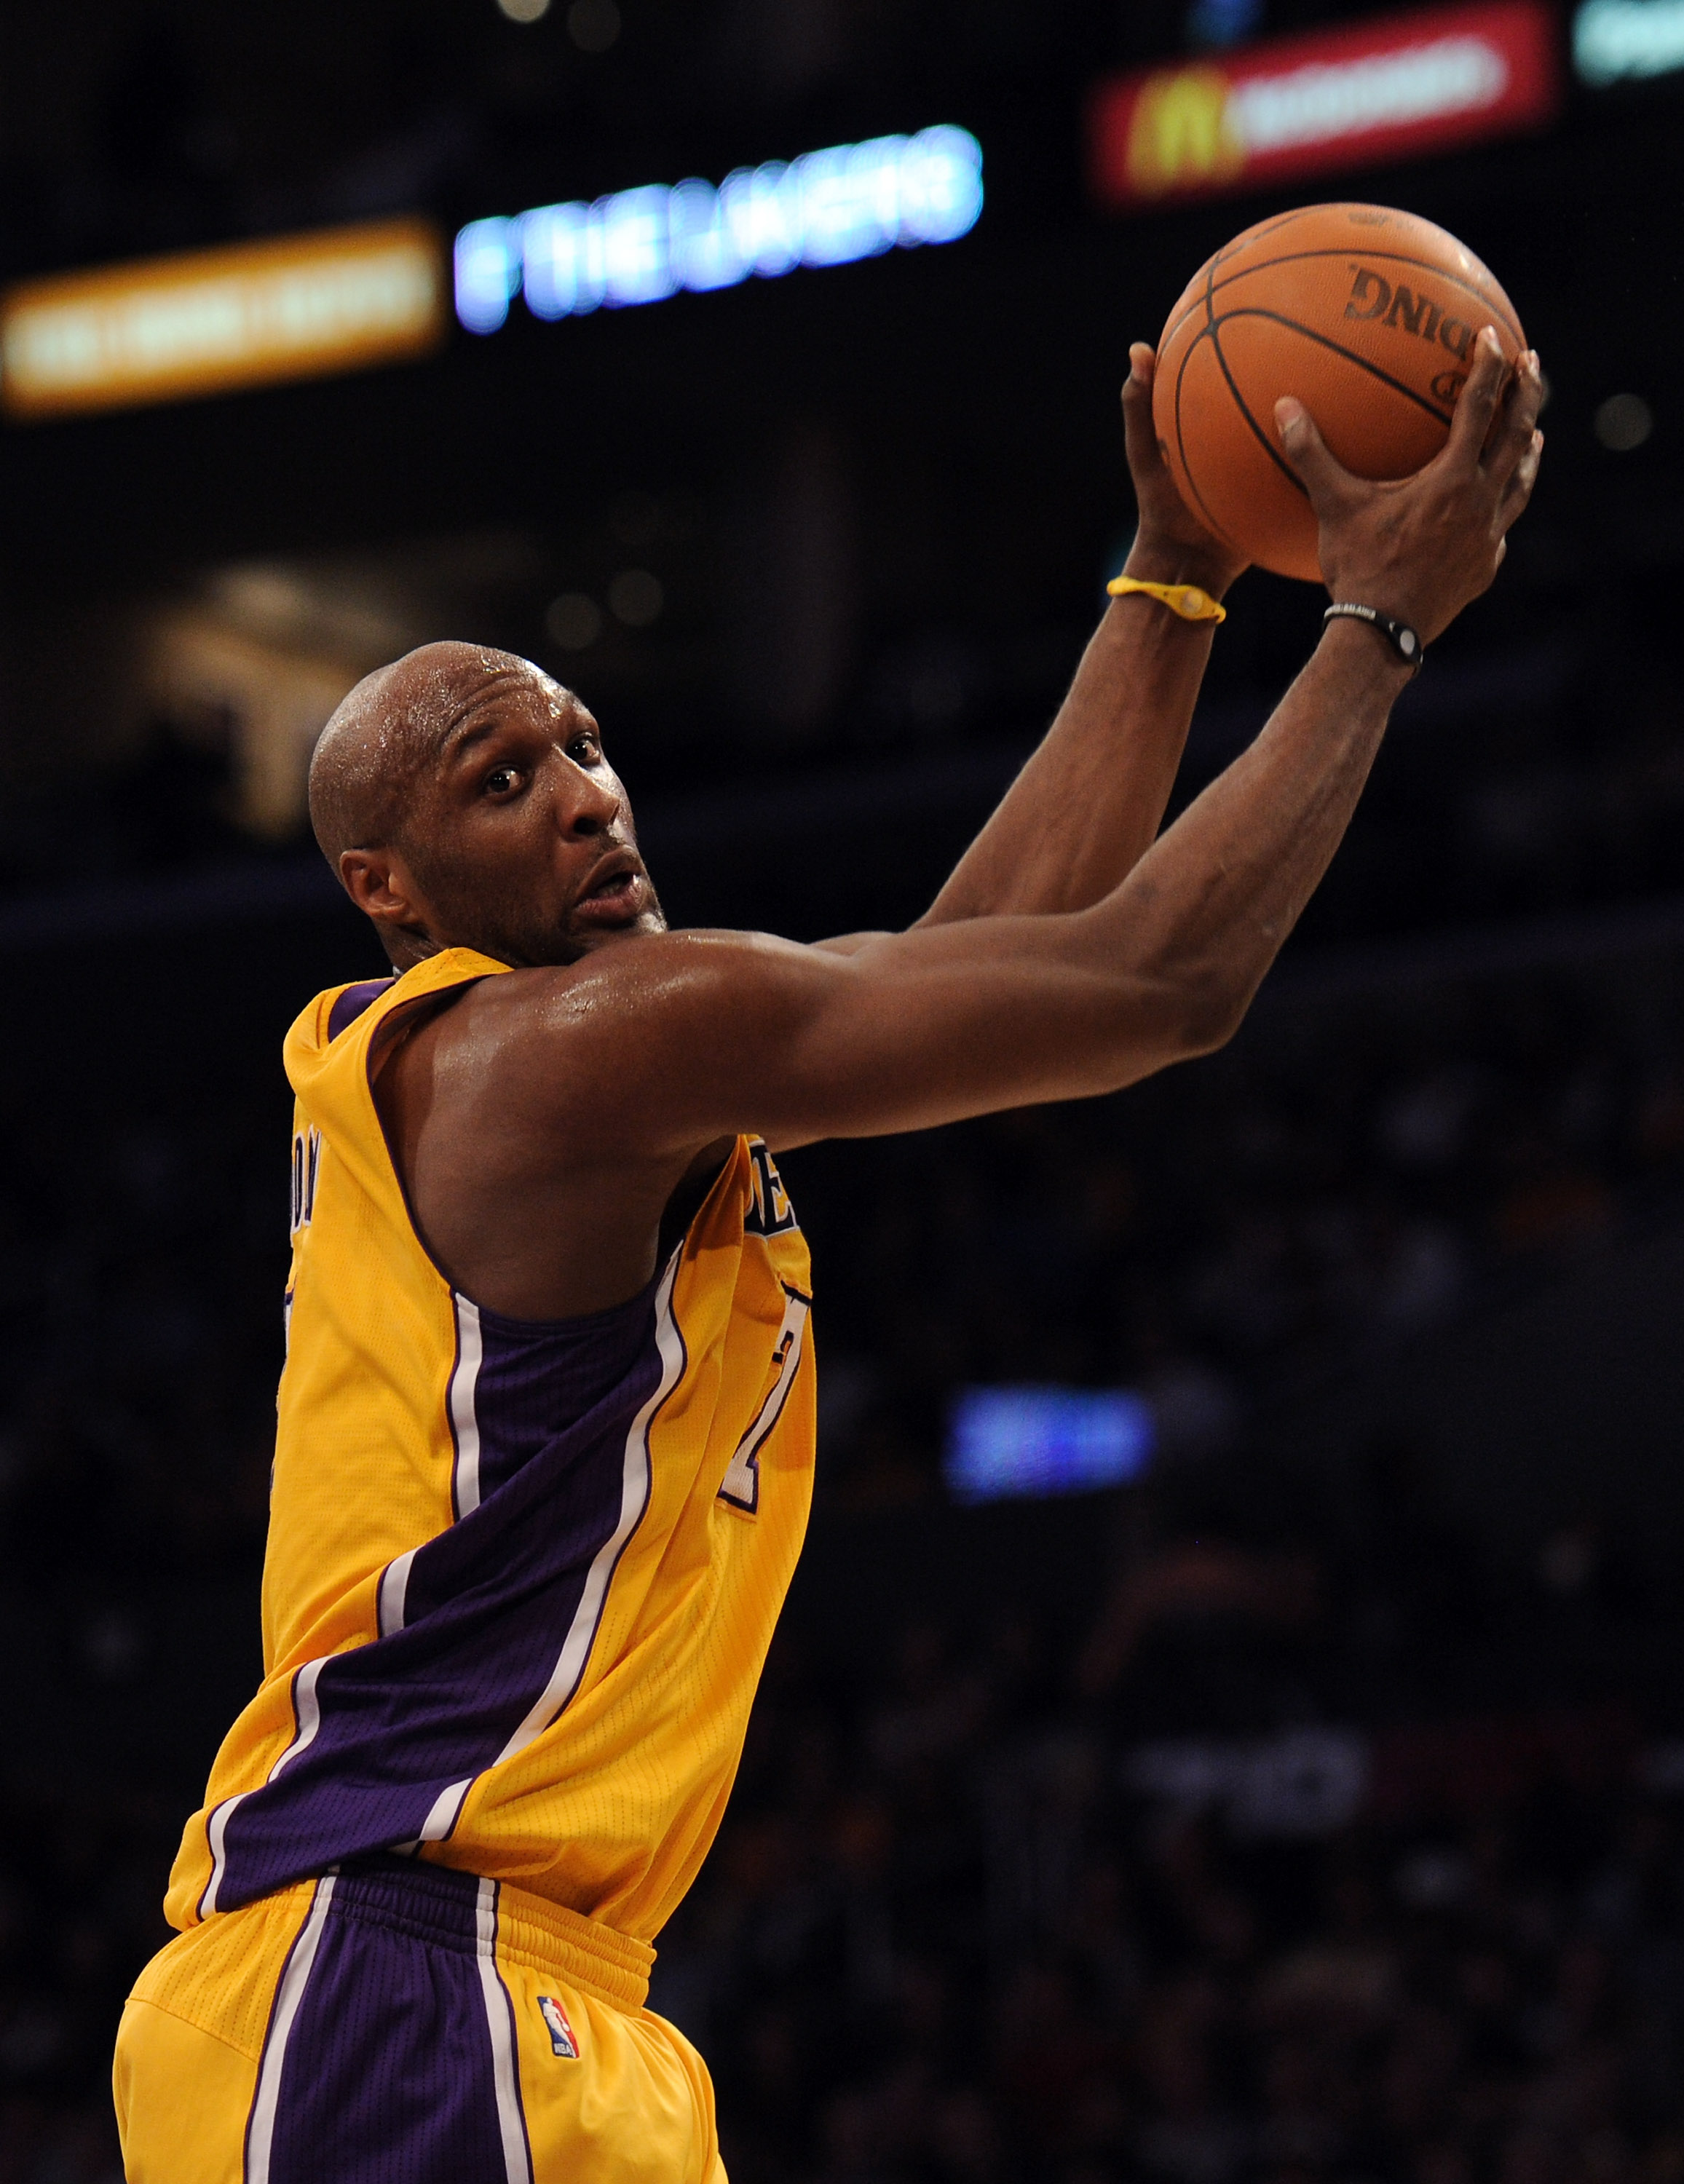 LOS ANGELES, CA - JANUARY 17:  Lamar Odom #7 of the Los Angeles Lakers grabs a pass during the game against the Oklahoma City Thunder at the Staples Center on January 17, 2011 in Los Angeles, California.  (Photo by Harry How/Getty Images)   NOTE TO USER: